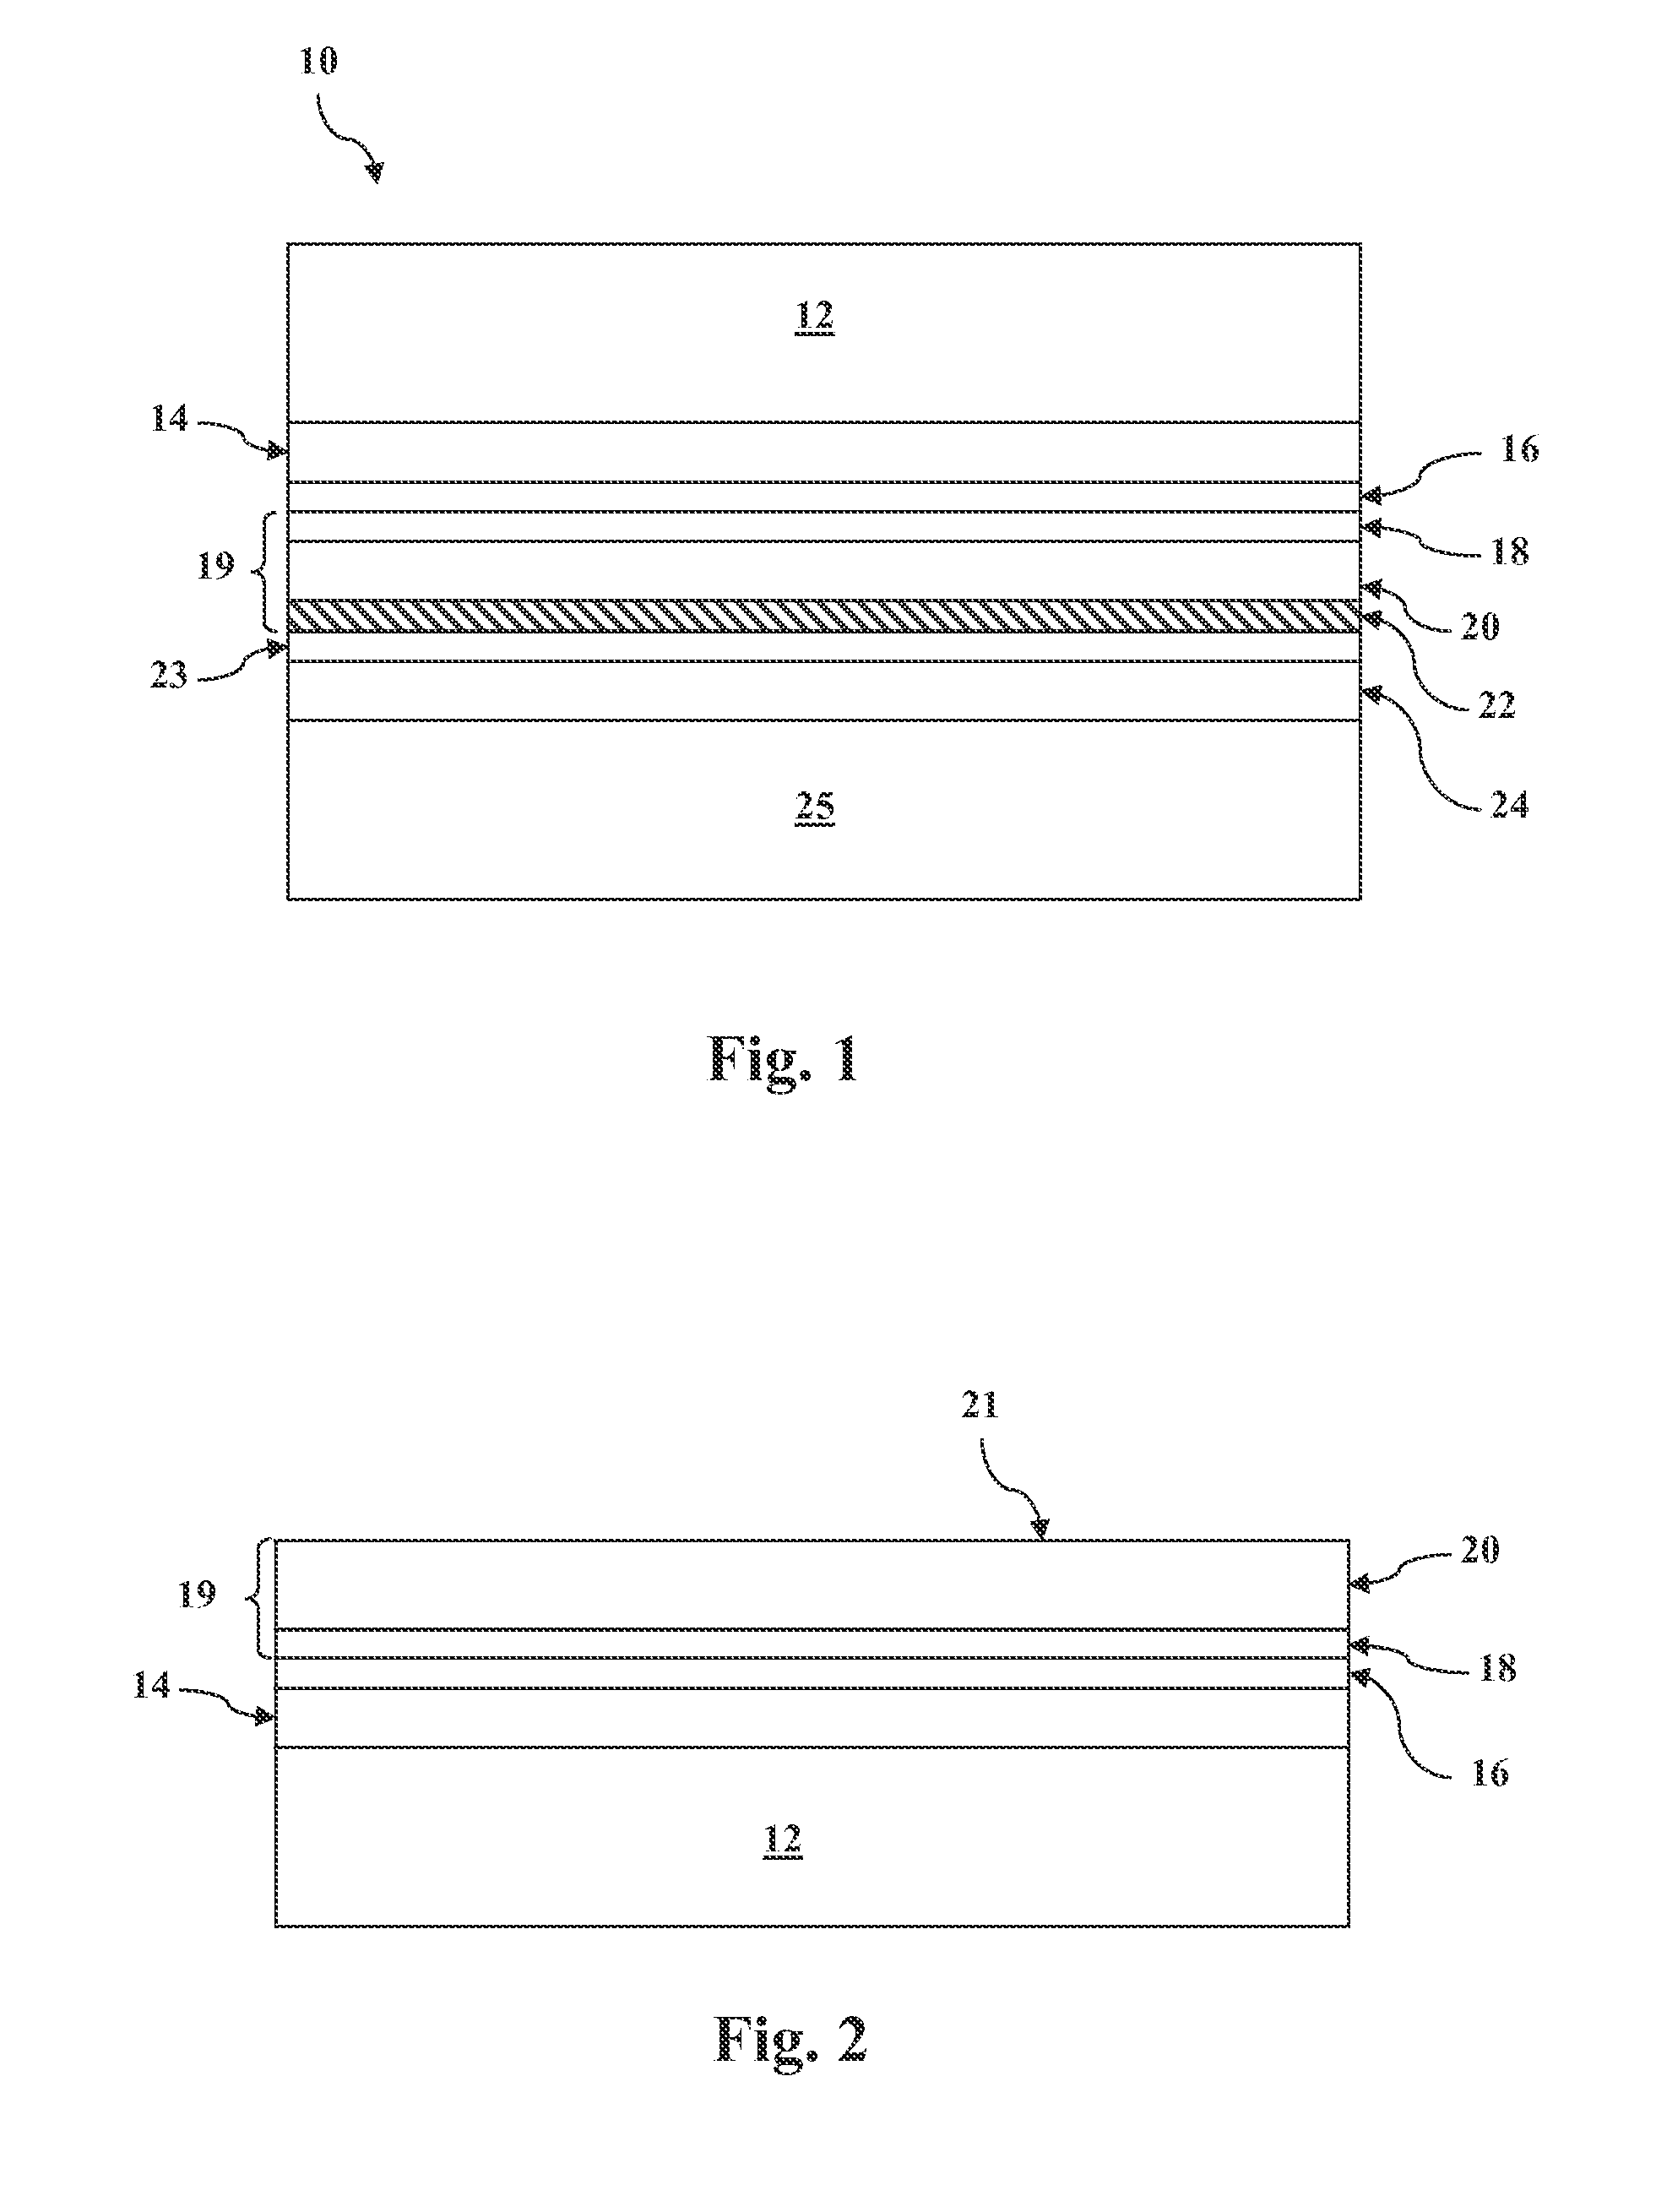 METHOD OF CONTROLLING THE AMOUNT OF Cu DOPING WHEN FORMING A BACK CONTACT OF A PHOTOVOLTAIC CELL